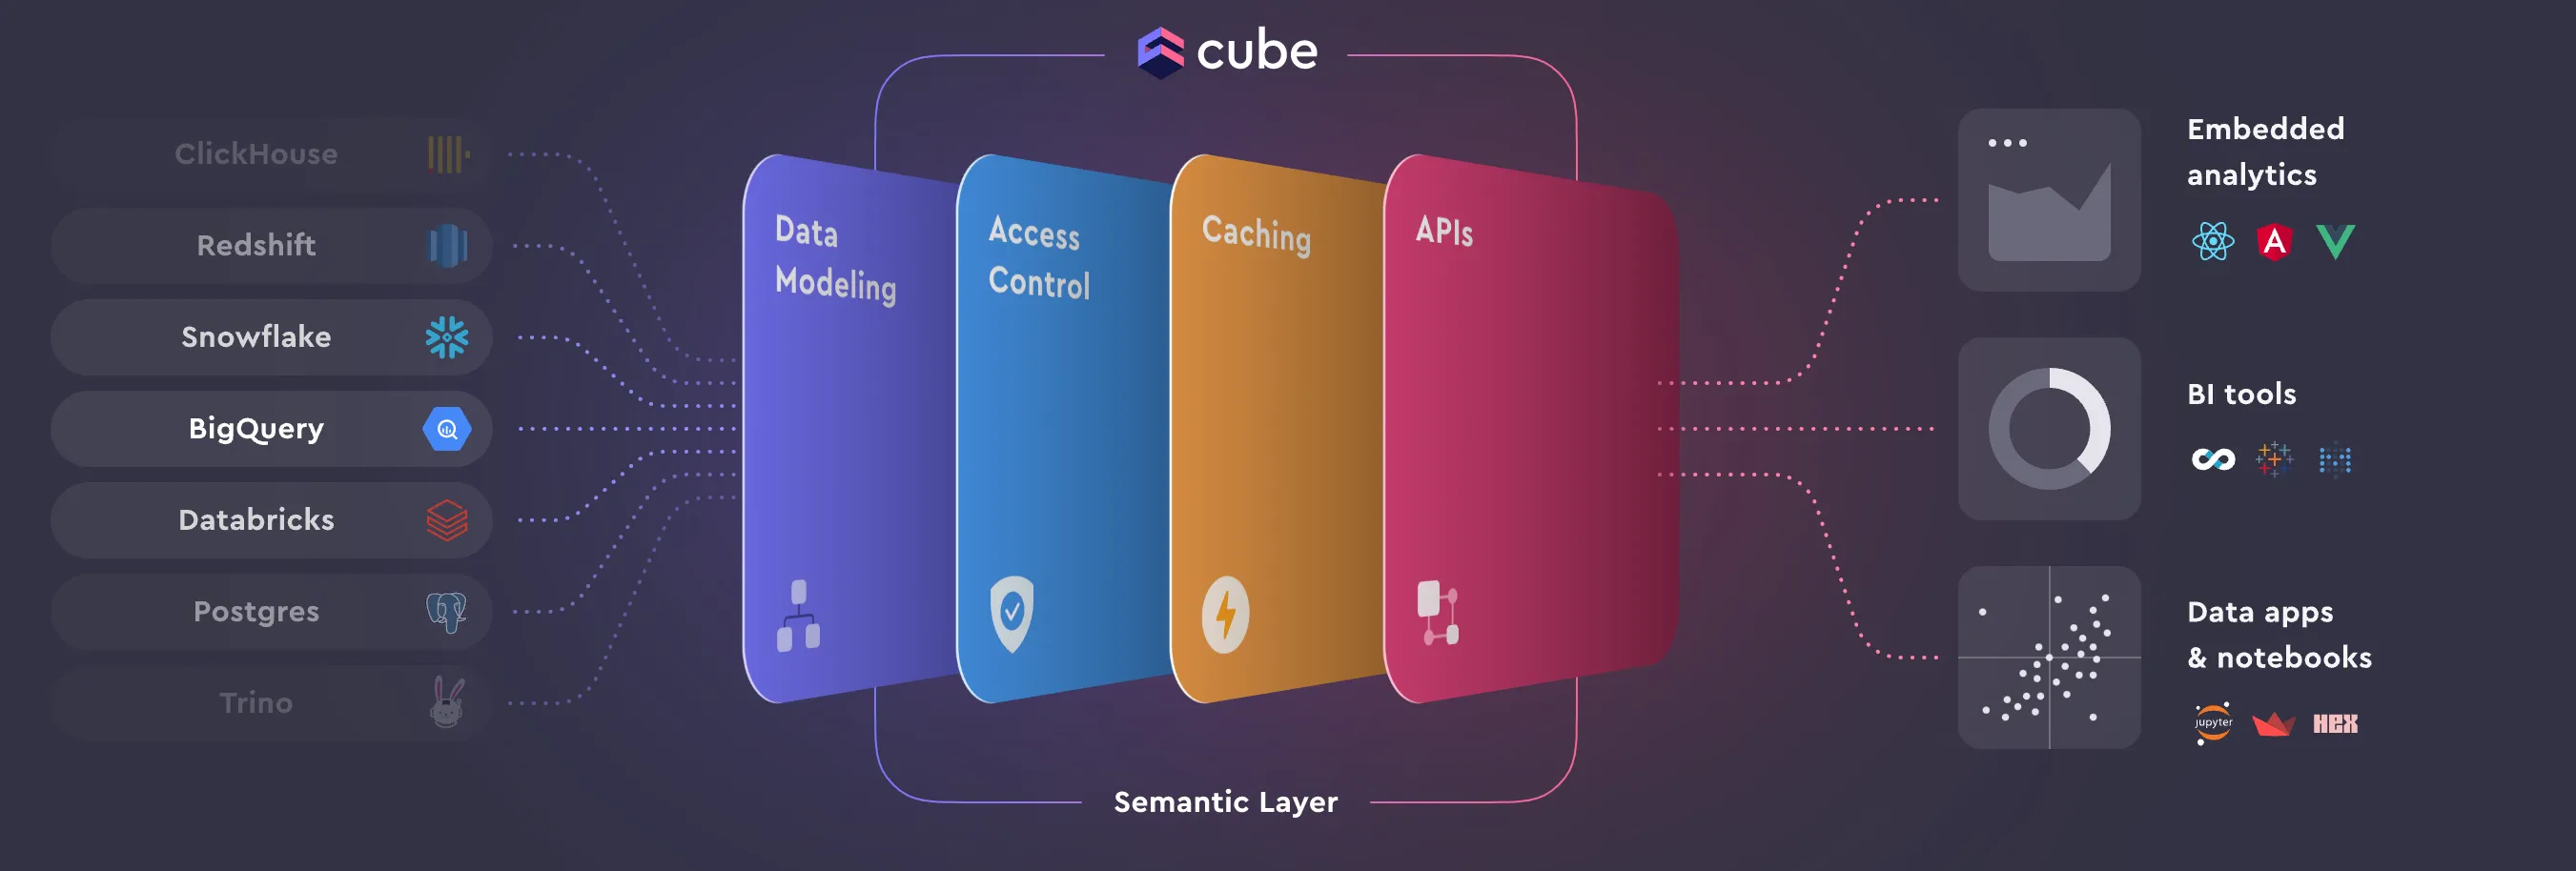 Cube Overview